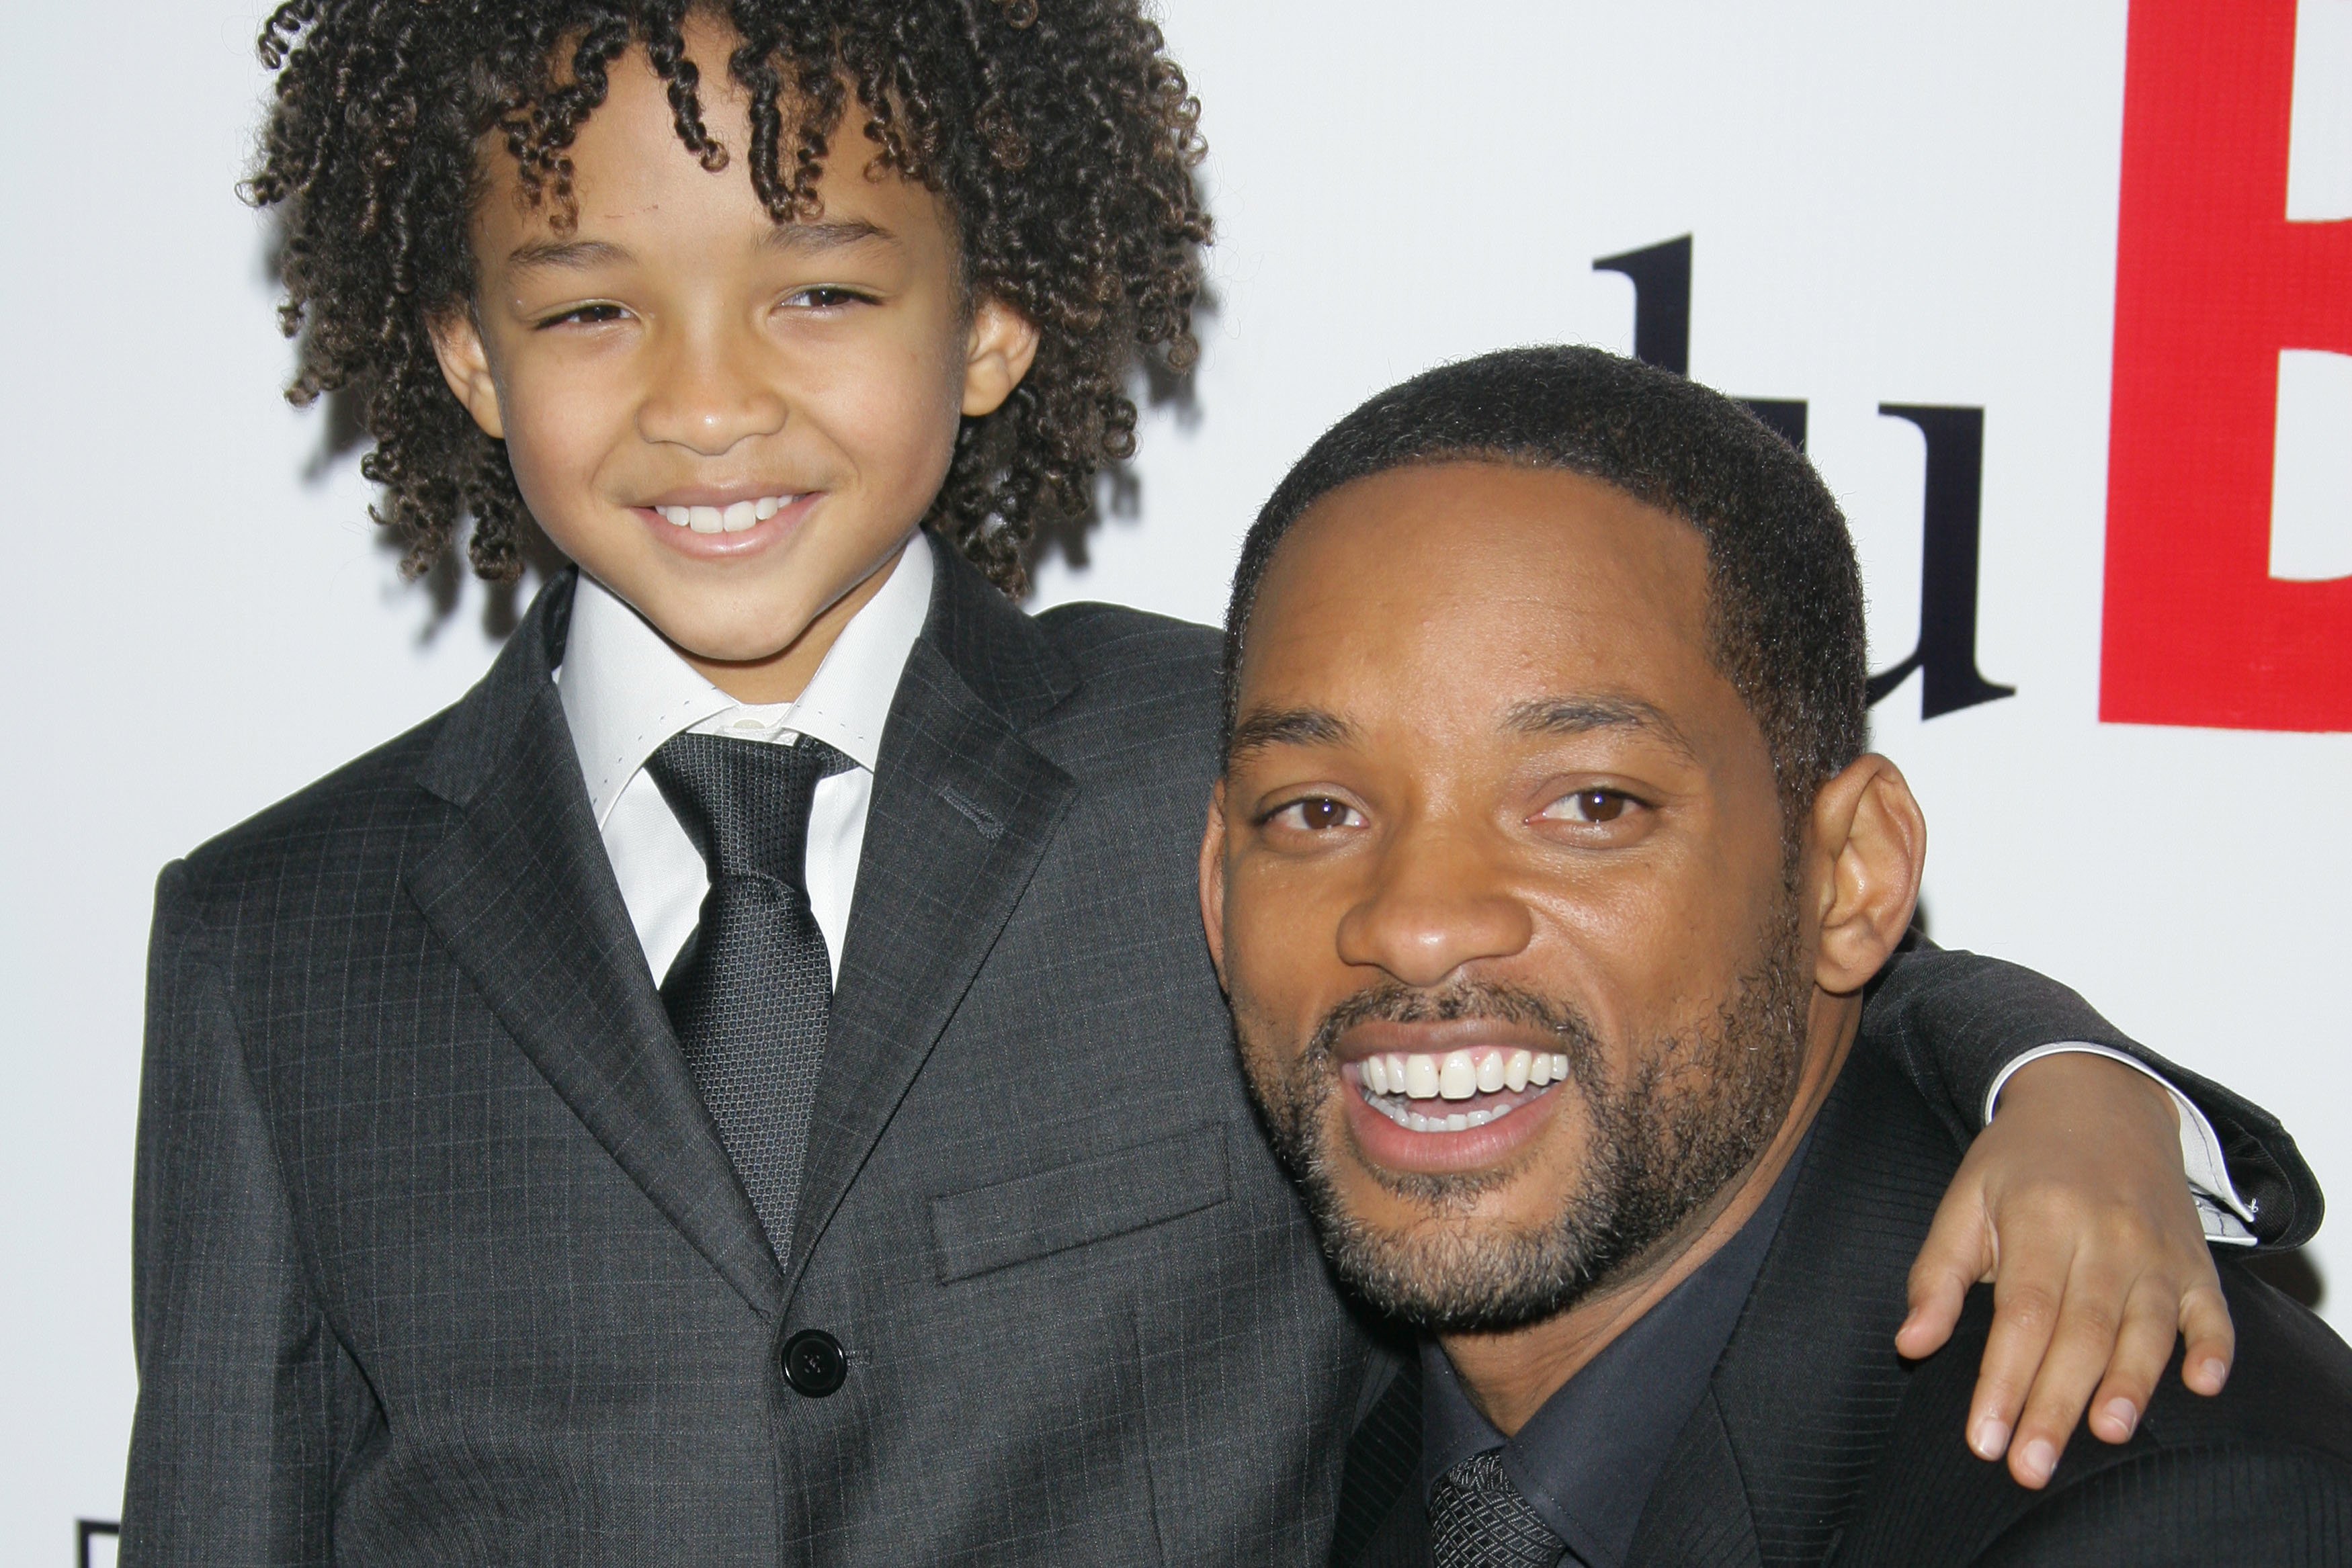 Will Smith and Jaden Smith movie Pursuit of Happyness premiere